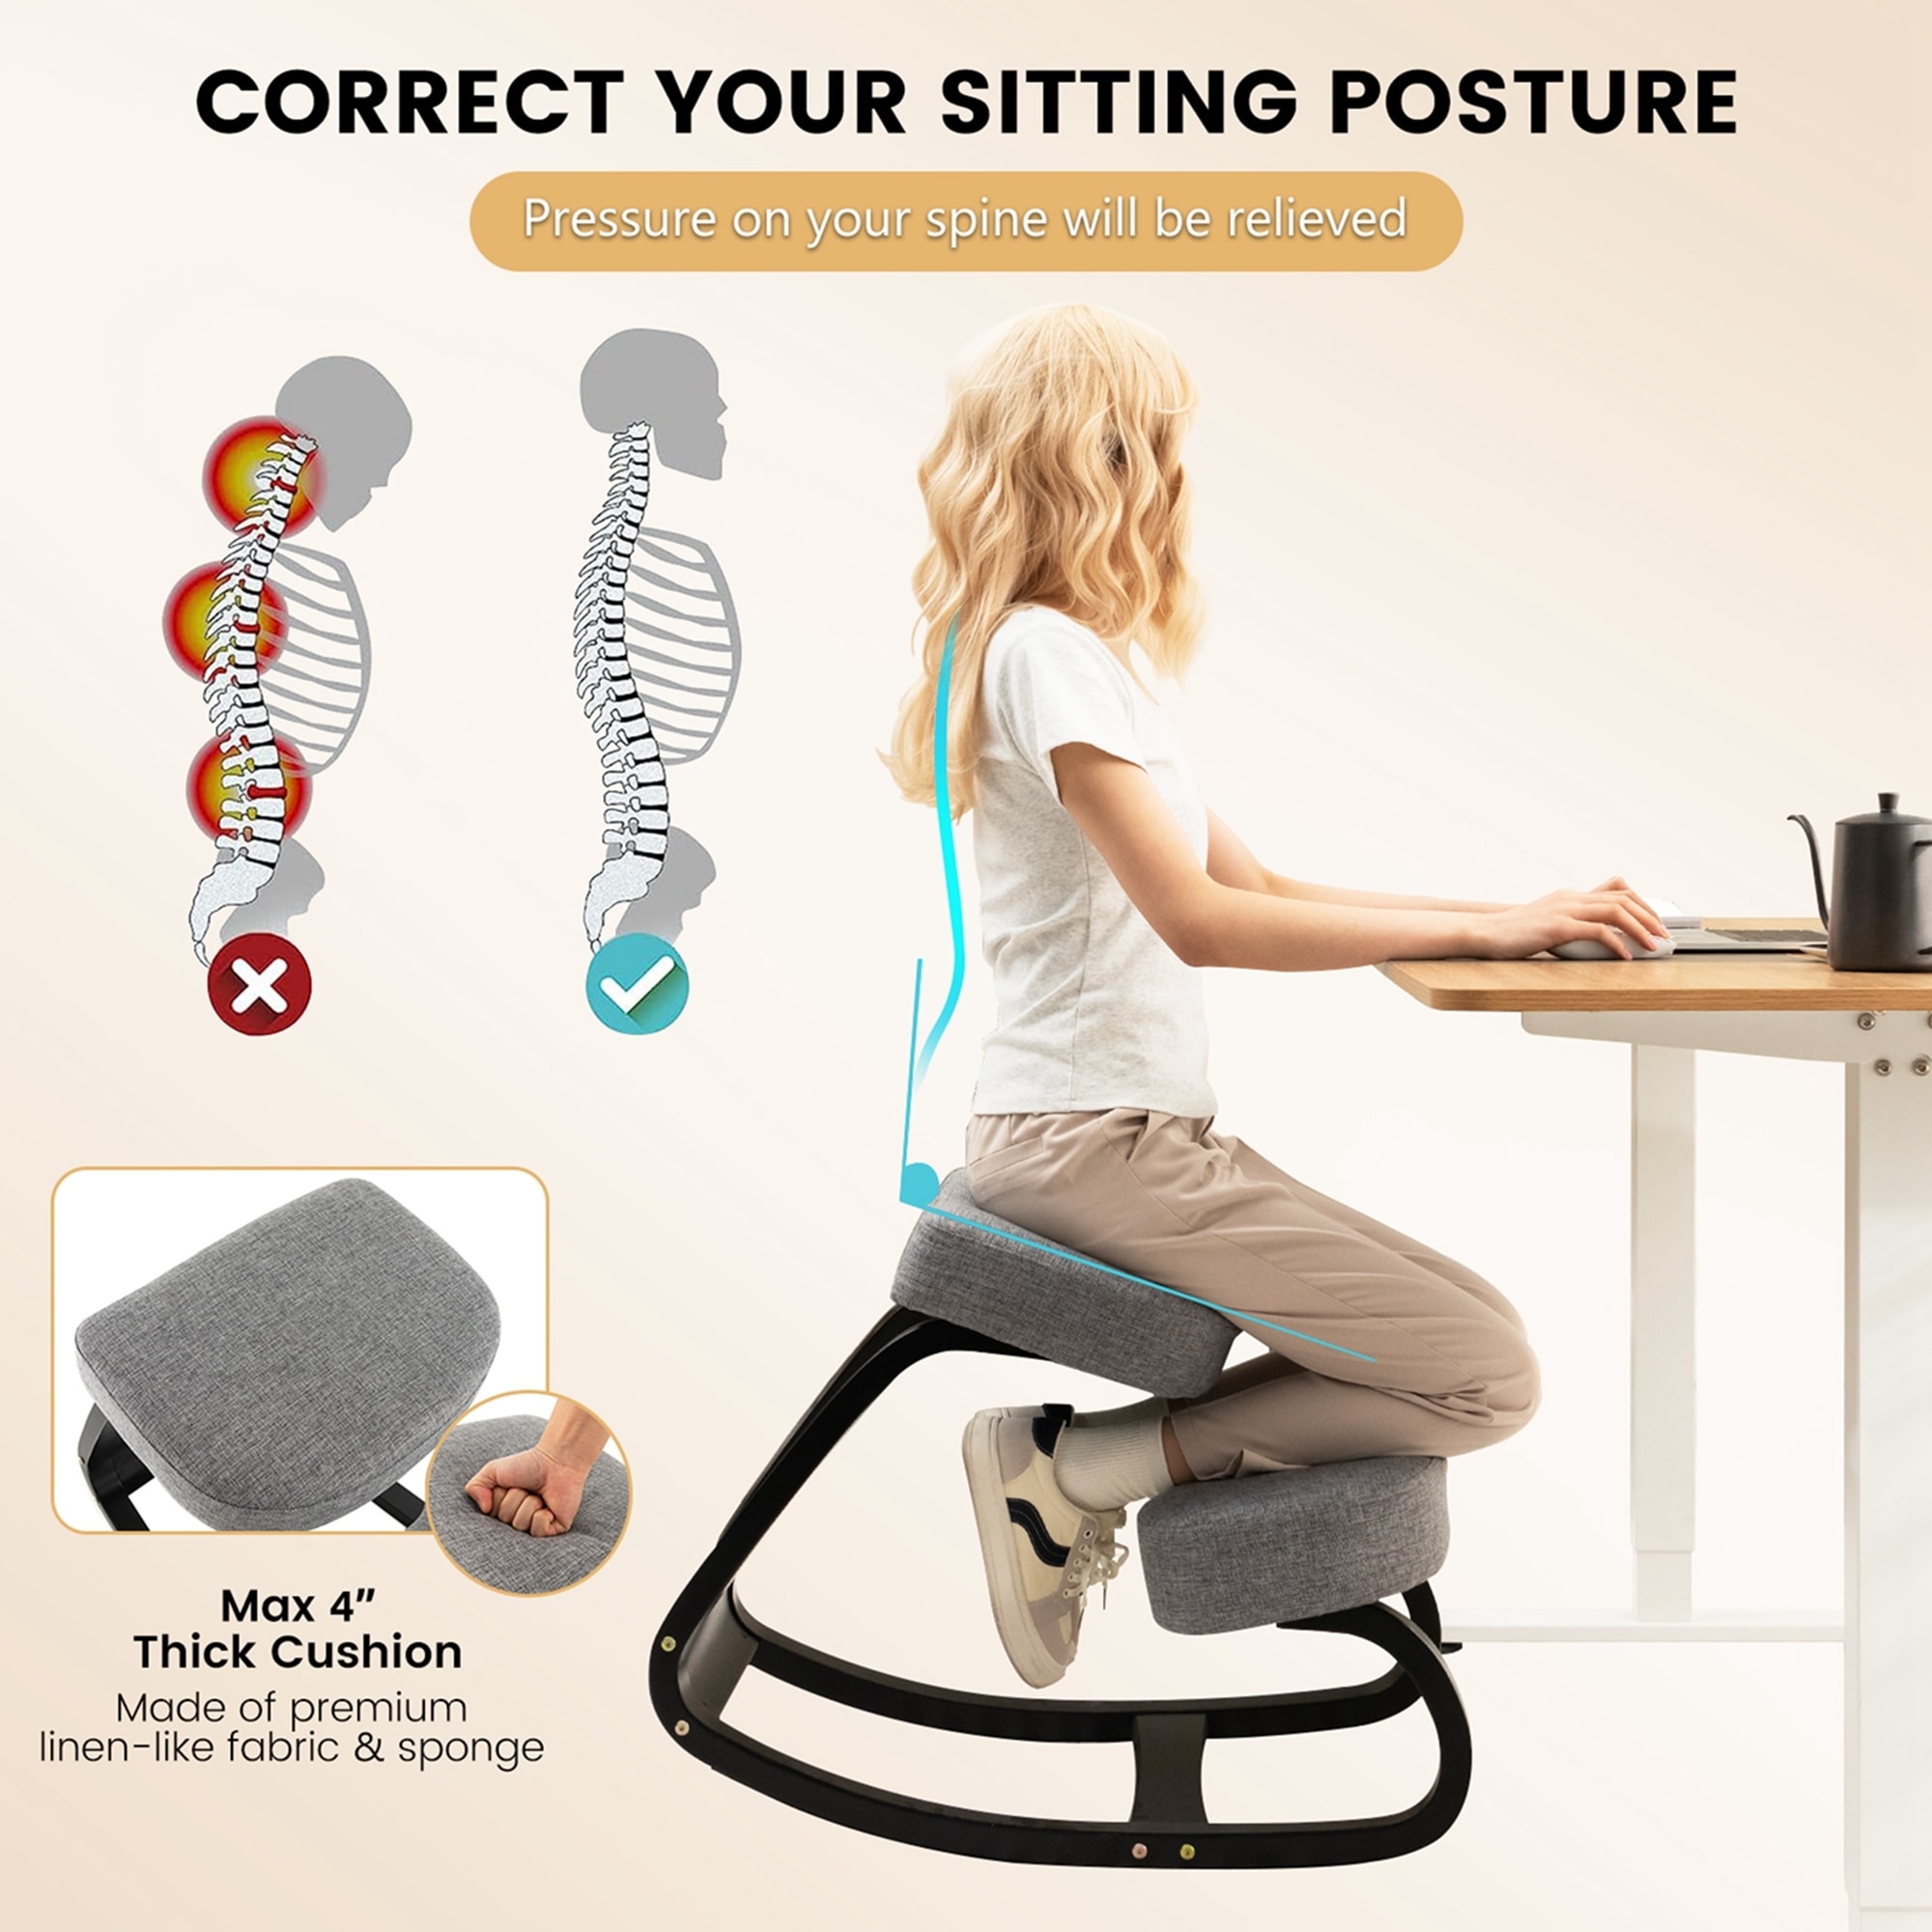 https://ak1.ostkcdn.com/images/products/is/images/direct/62c33270e32afd9faf17add9b934f6313b33fe65/Costway-Rocking-Kneeling-Chair-Ergonomic-Posture-Correcting-Back-Pain.jpg